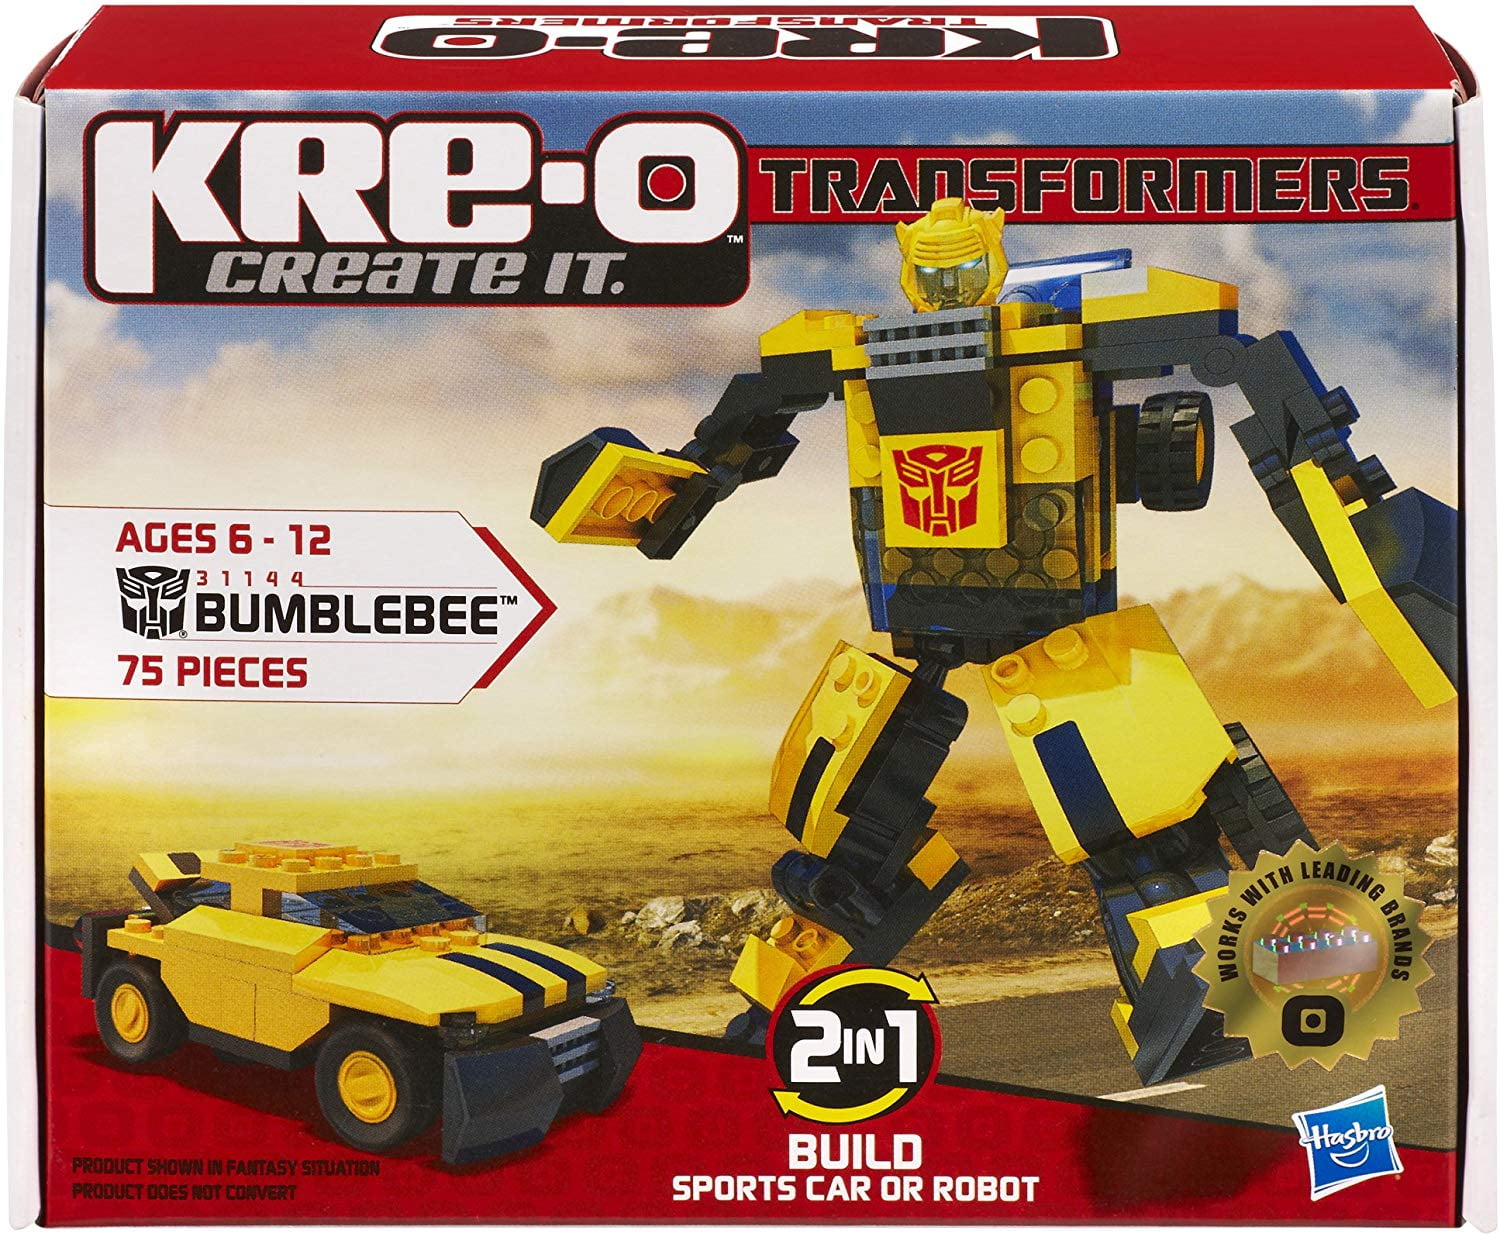 Hasbro Kre-O Transformers Action Figure for sale online